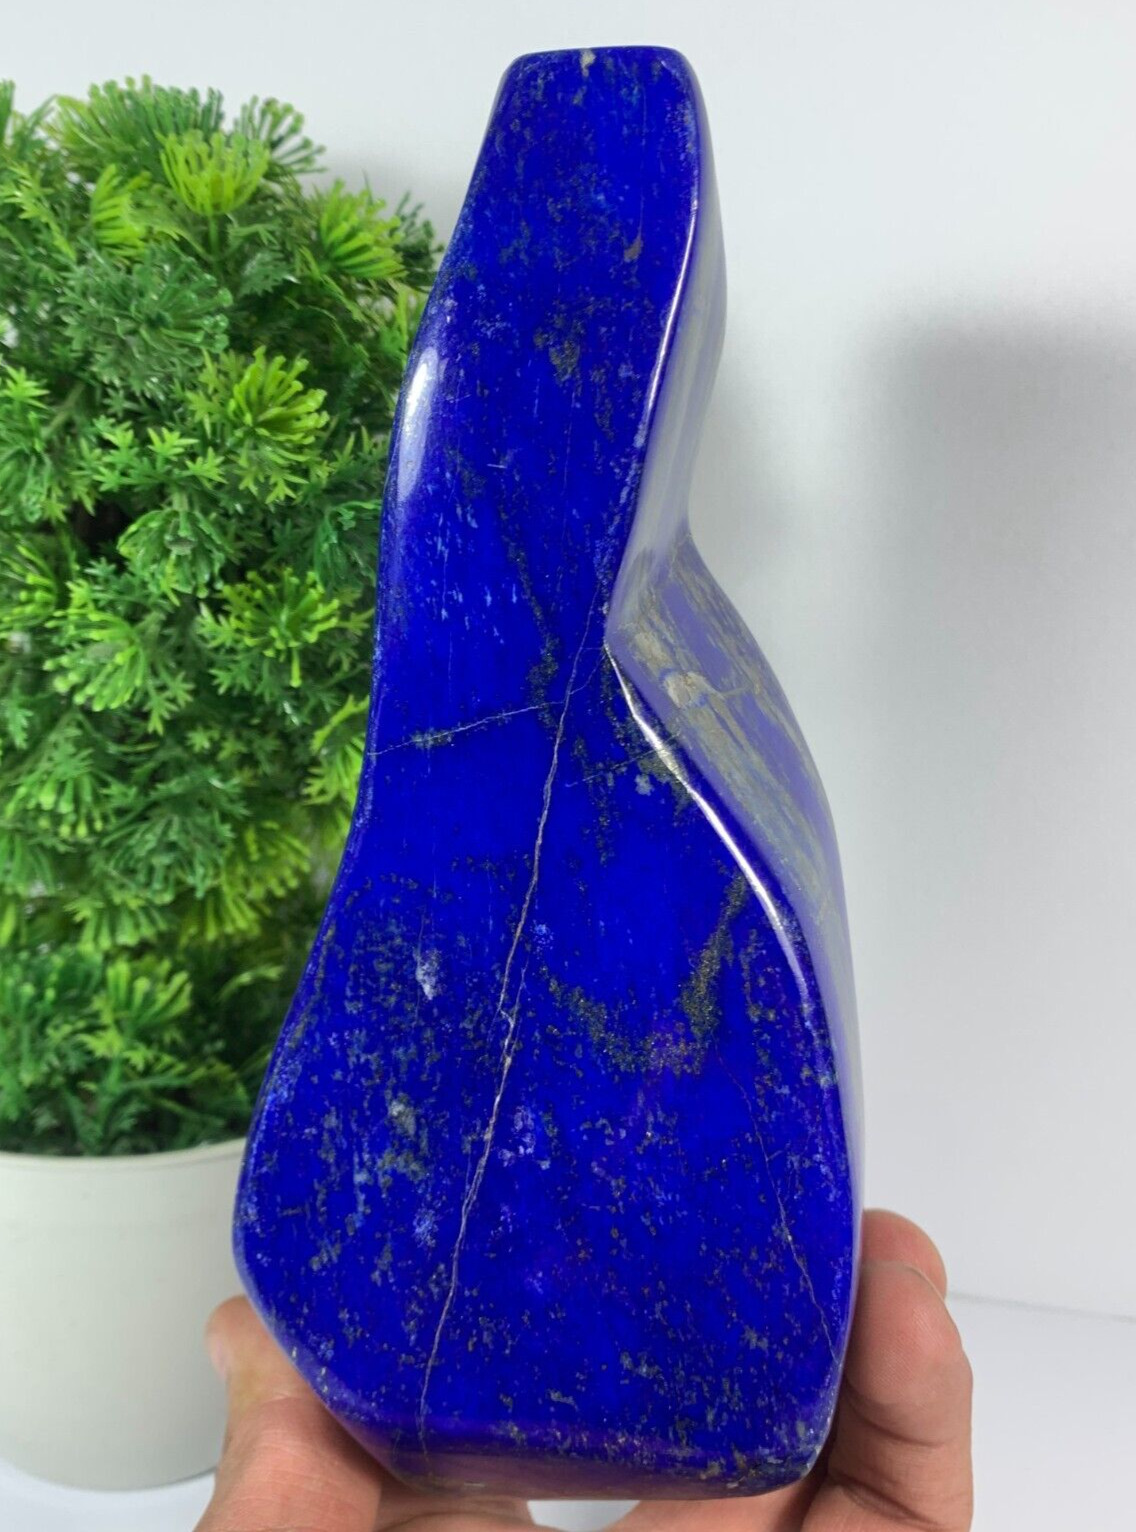 1327g Lapis Lazuli Freeform Rough Tumbled Polished AAA+ Grade From Afghanistan